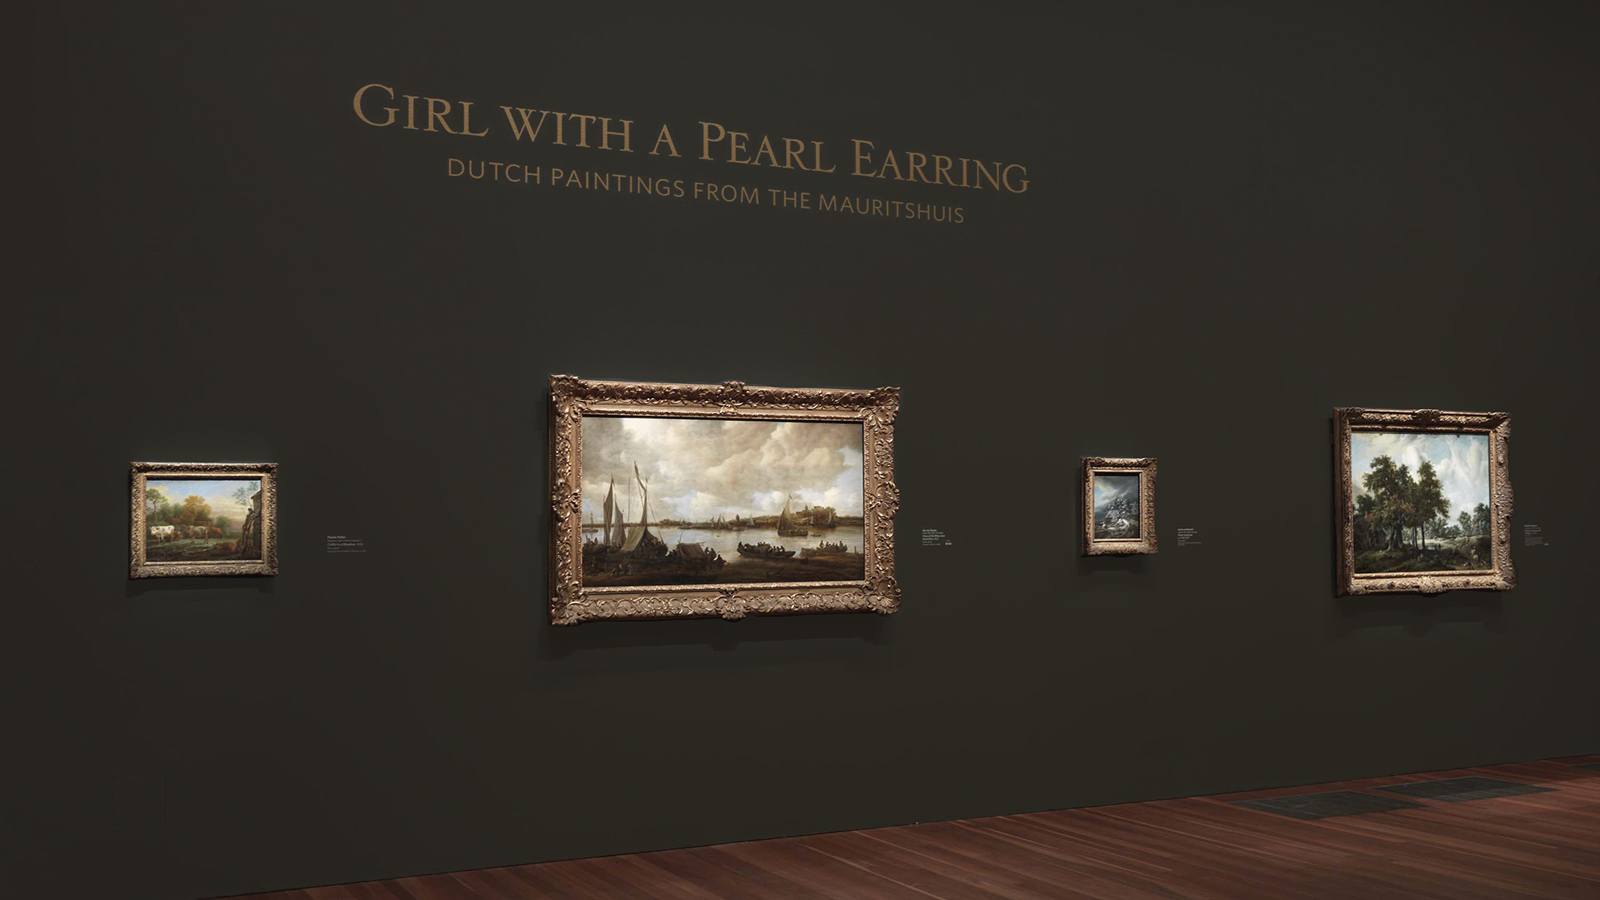 A view of the deYoung gallery in San Fransisco, the Girl with the Pearl Earring art exhibit using custom dry transfers on walls for captions and painting descriptions